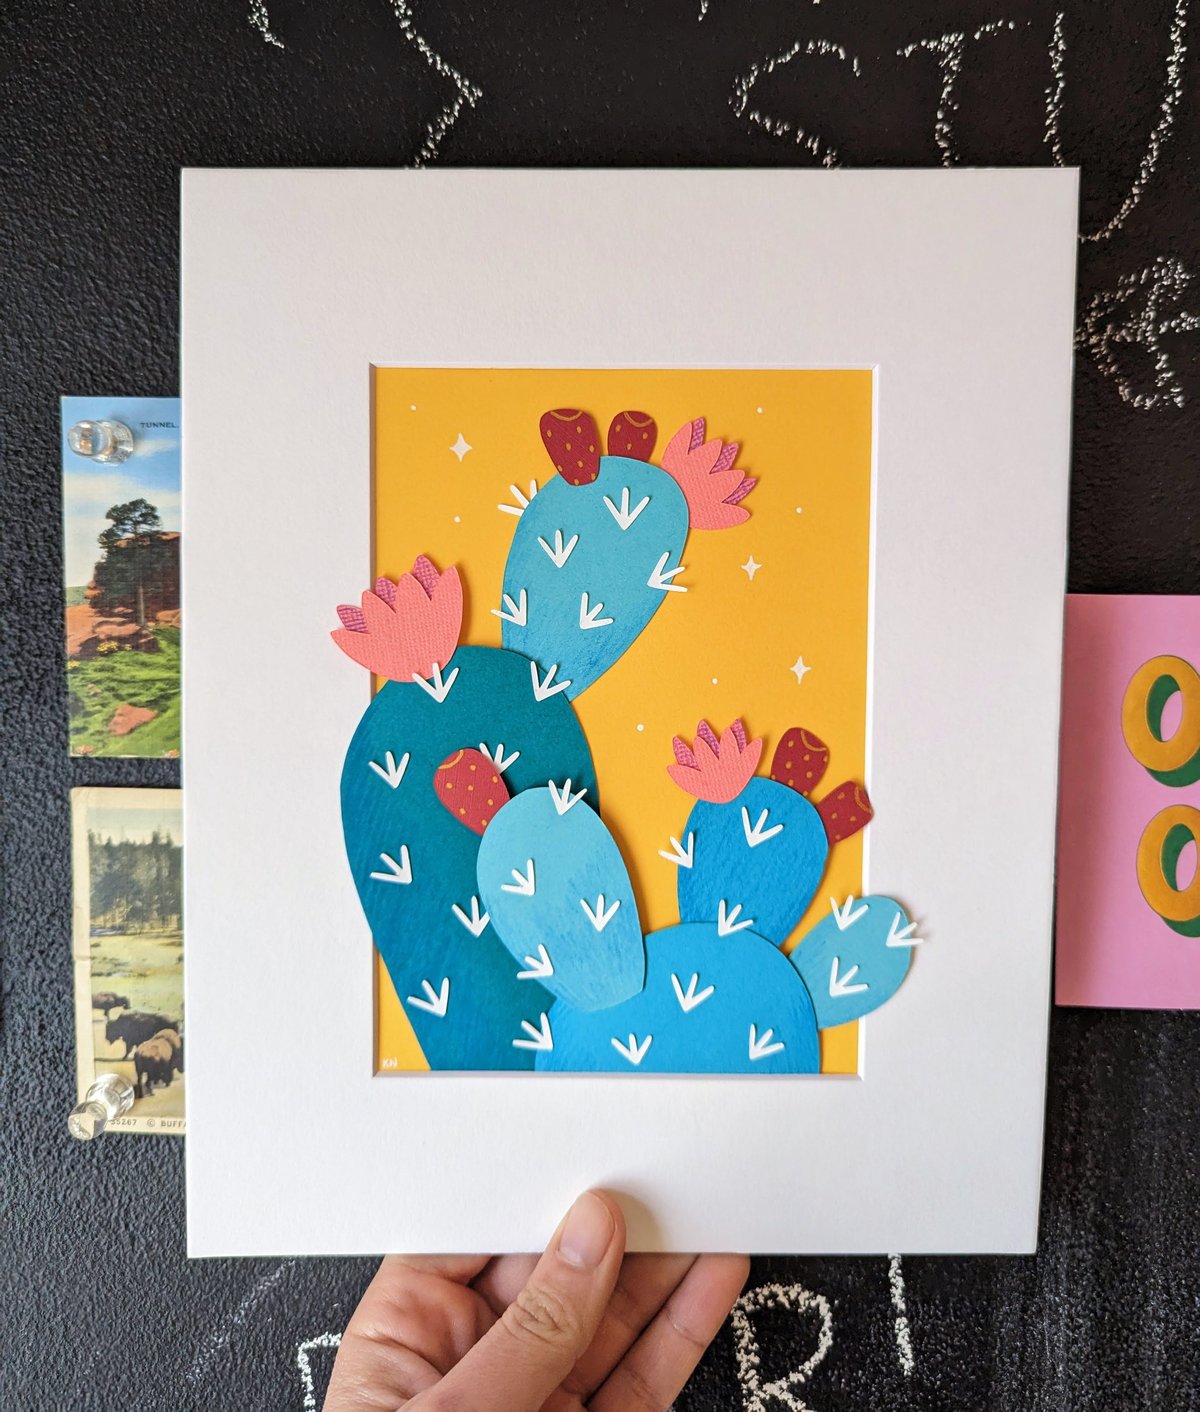 Image of Cut paper prickly pear